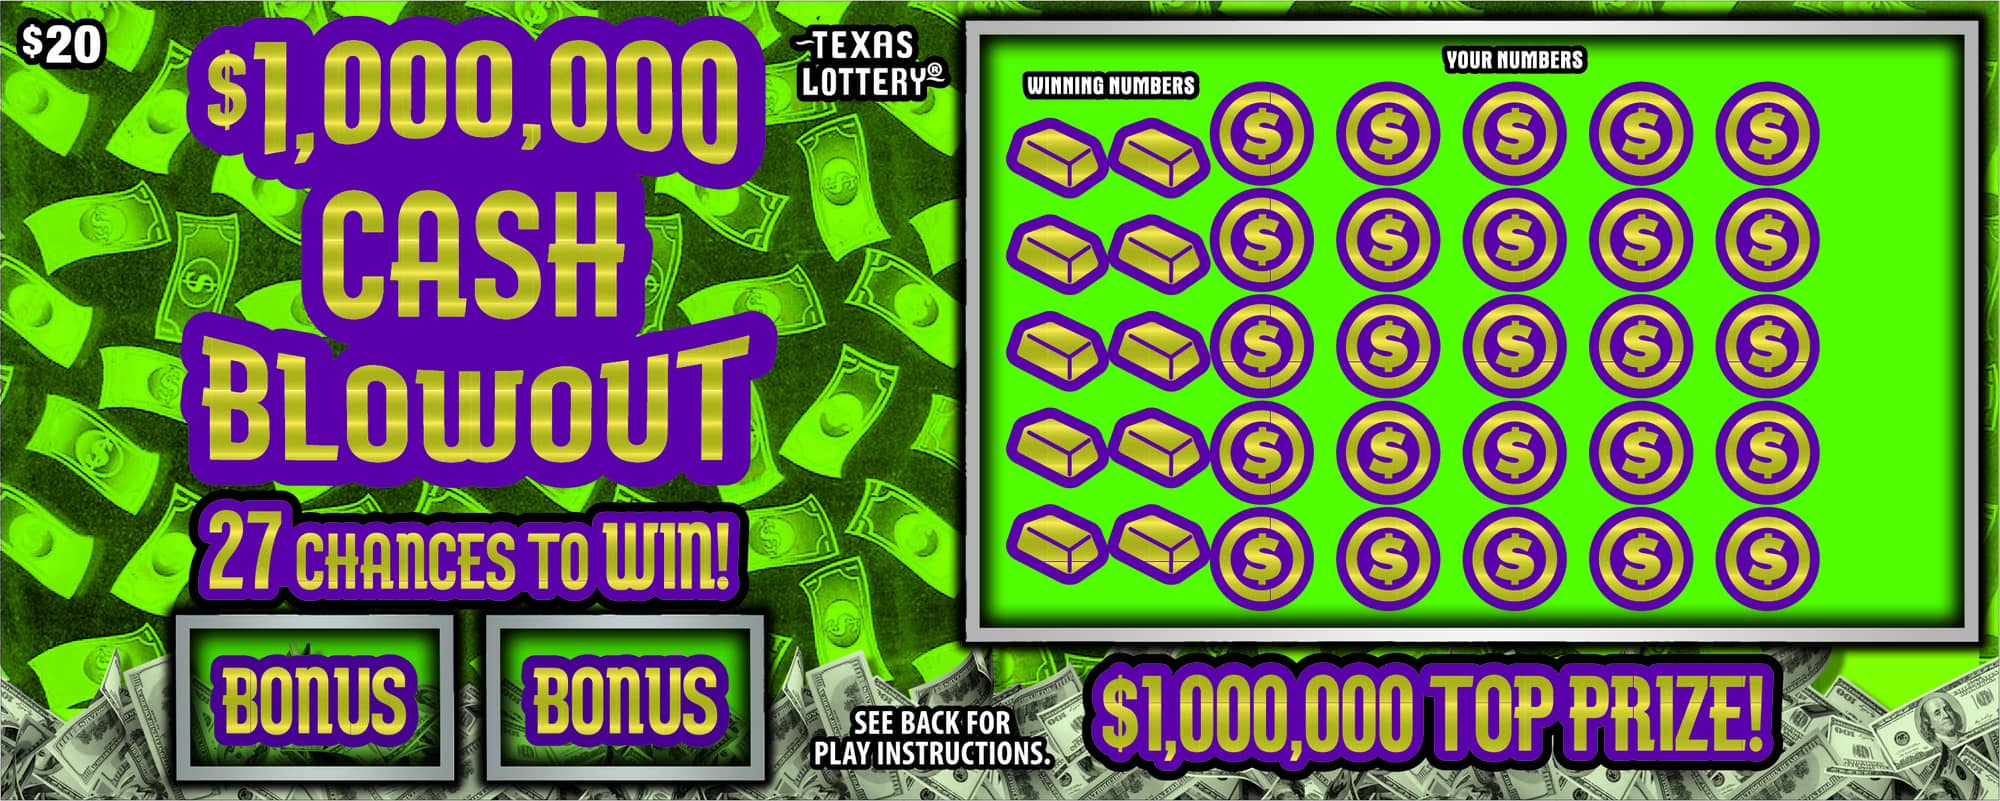 Texas Lottery launches new scratch-off game to benefit veterans